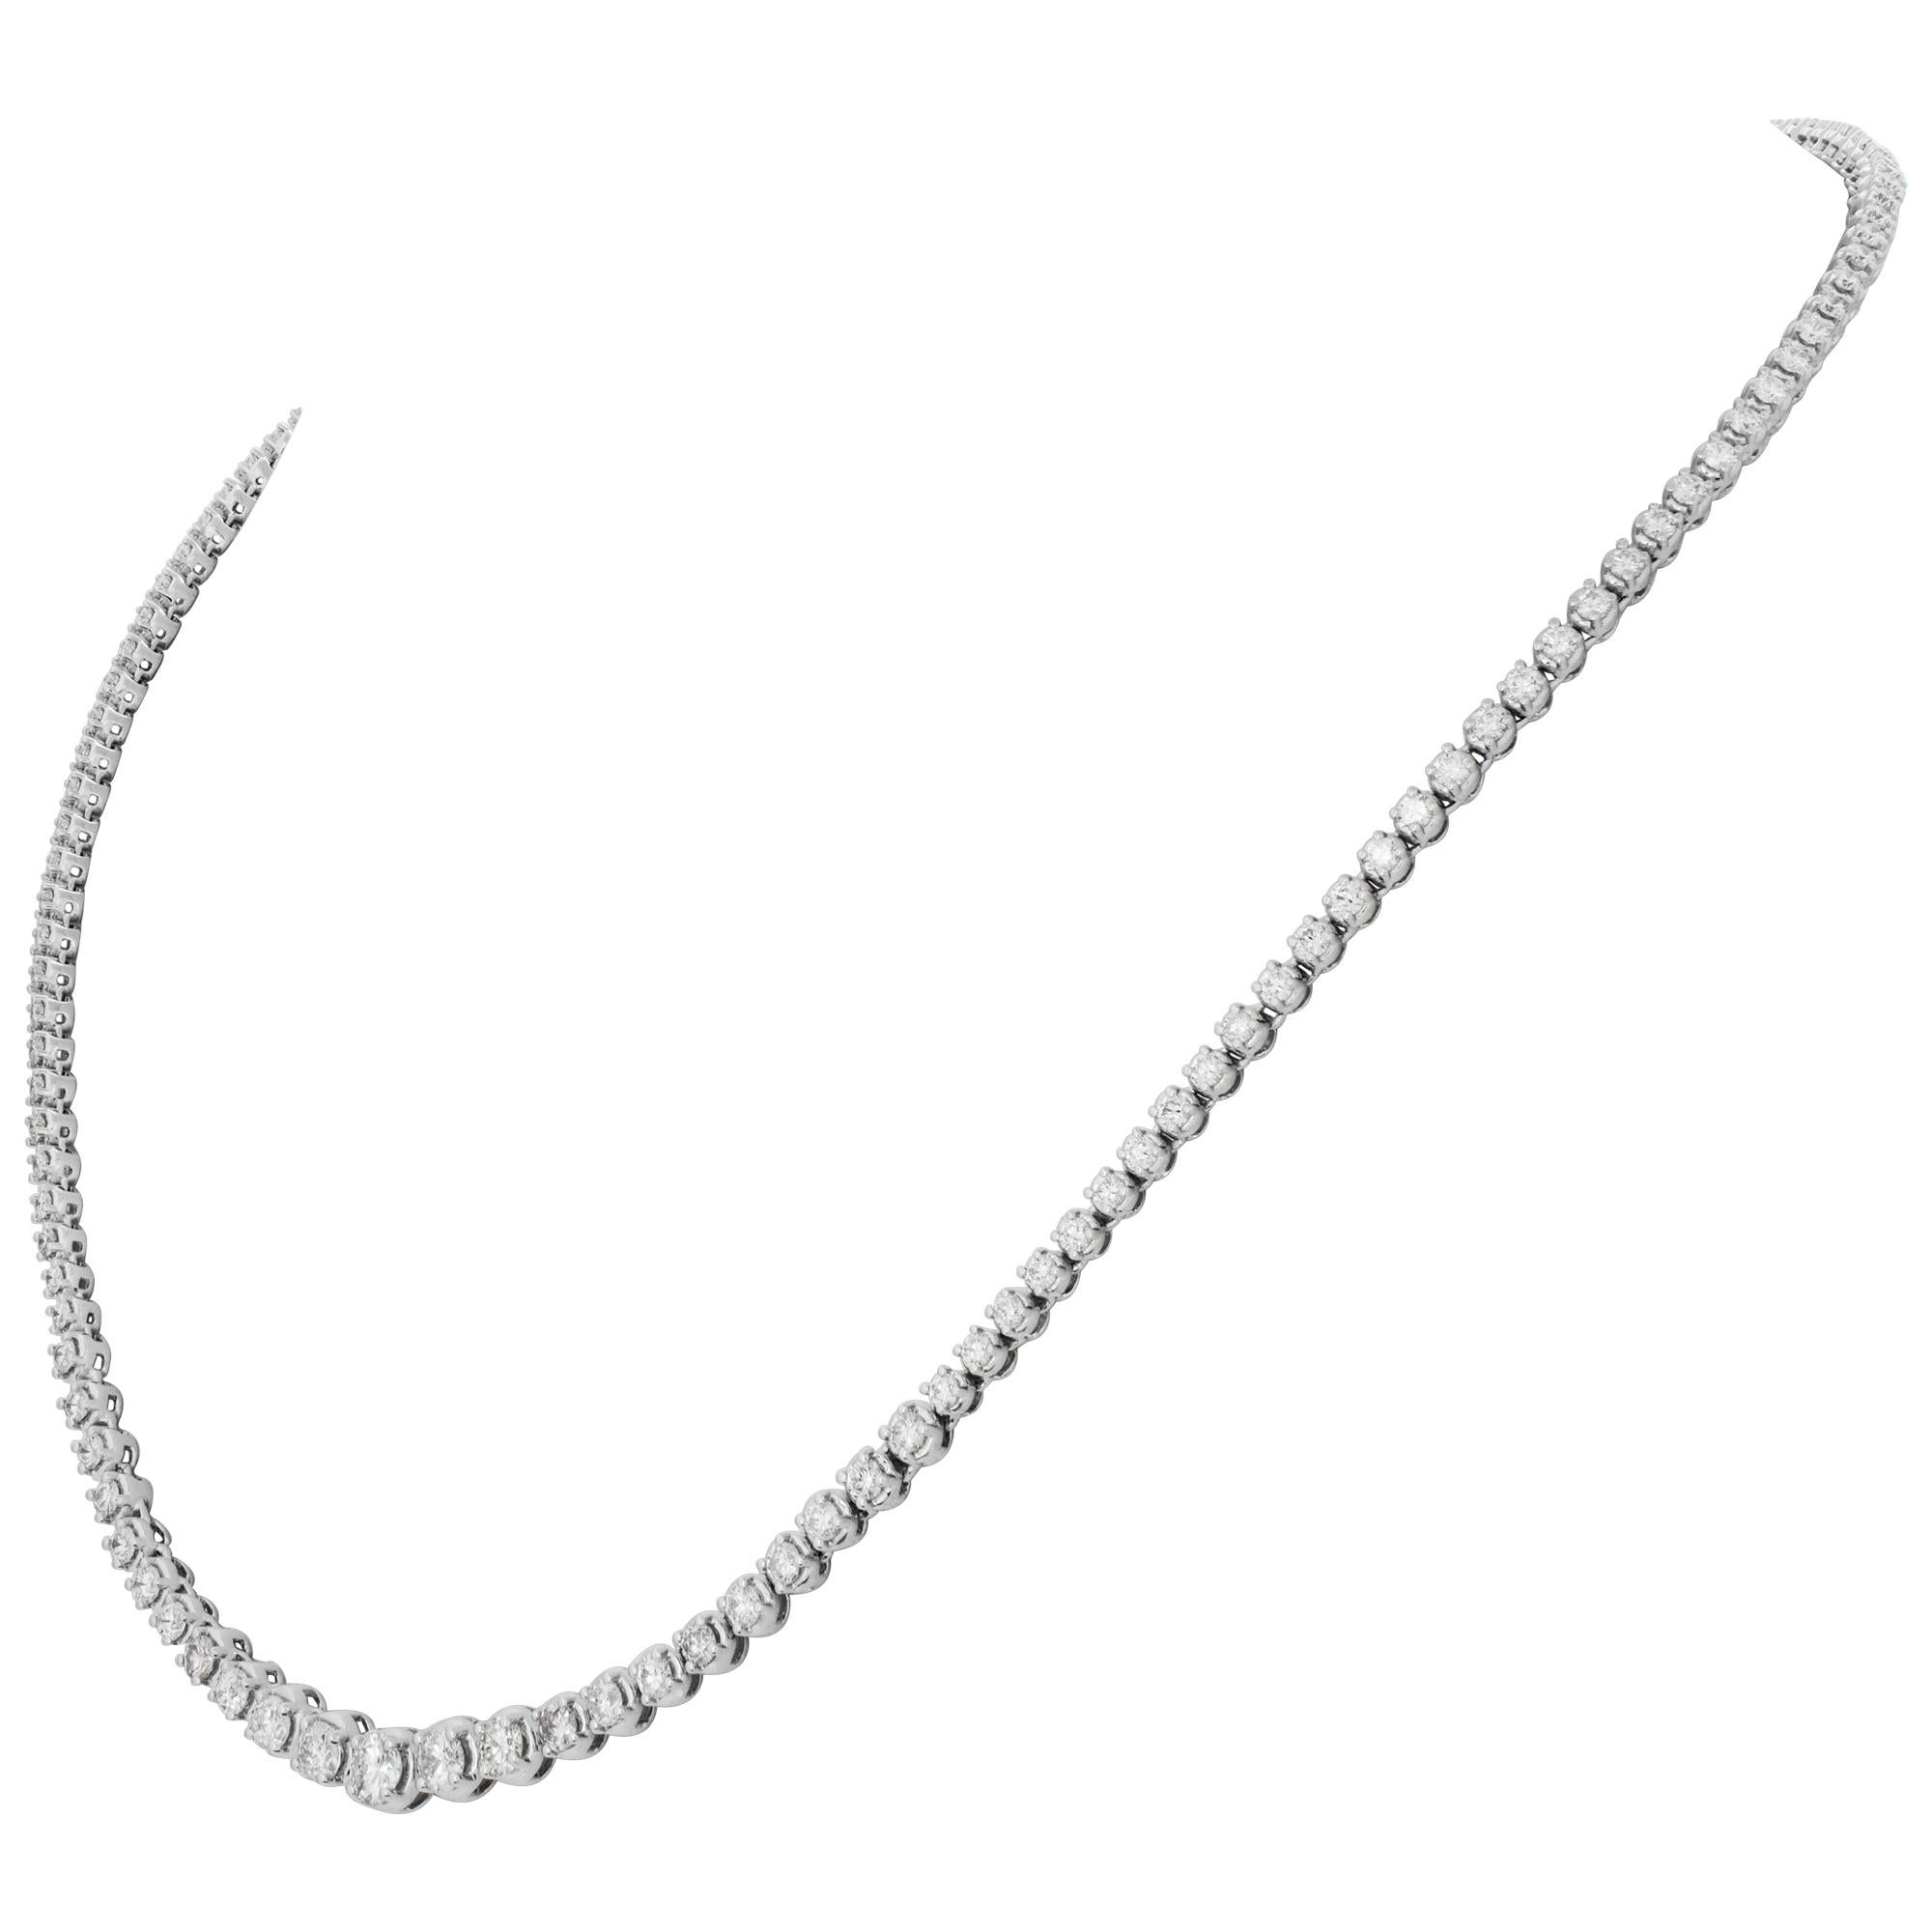 Graduated diamonds line necklace in 18k white gold. Round brillliant cut diamonds total approx. weight: 6.00 carats, estimate: H-I color, SI clarity. Length 17 inches.
